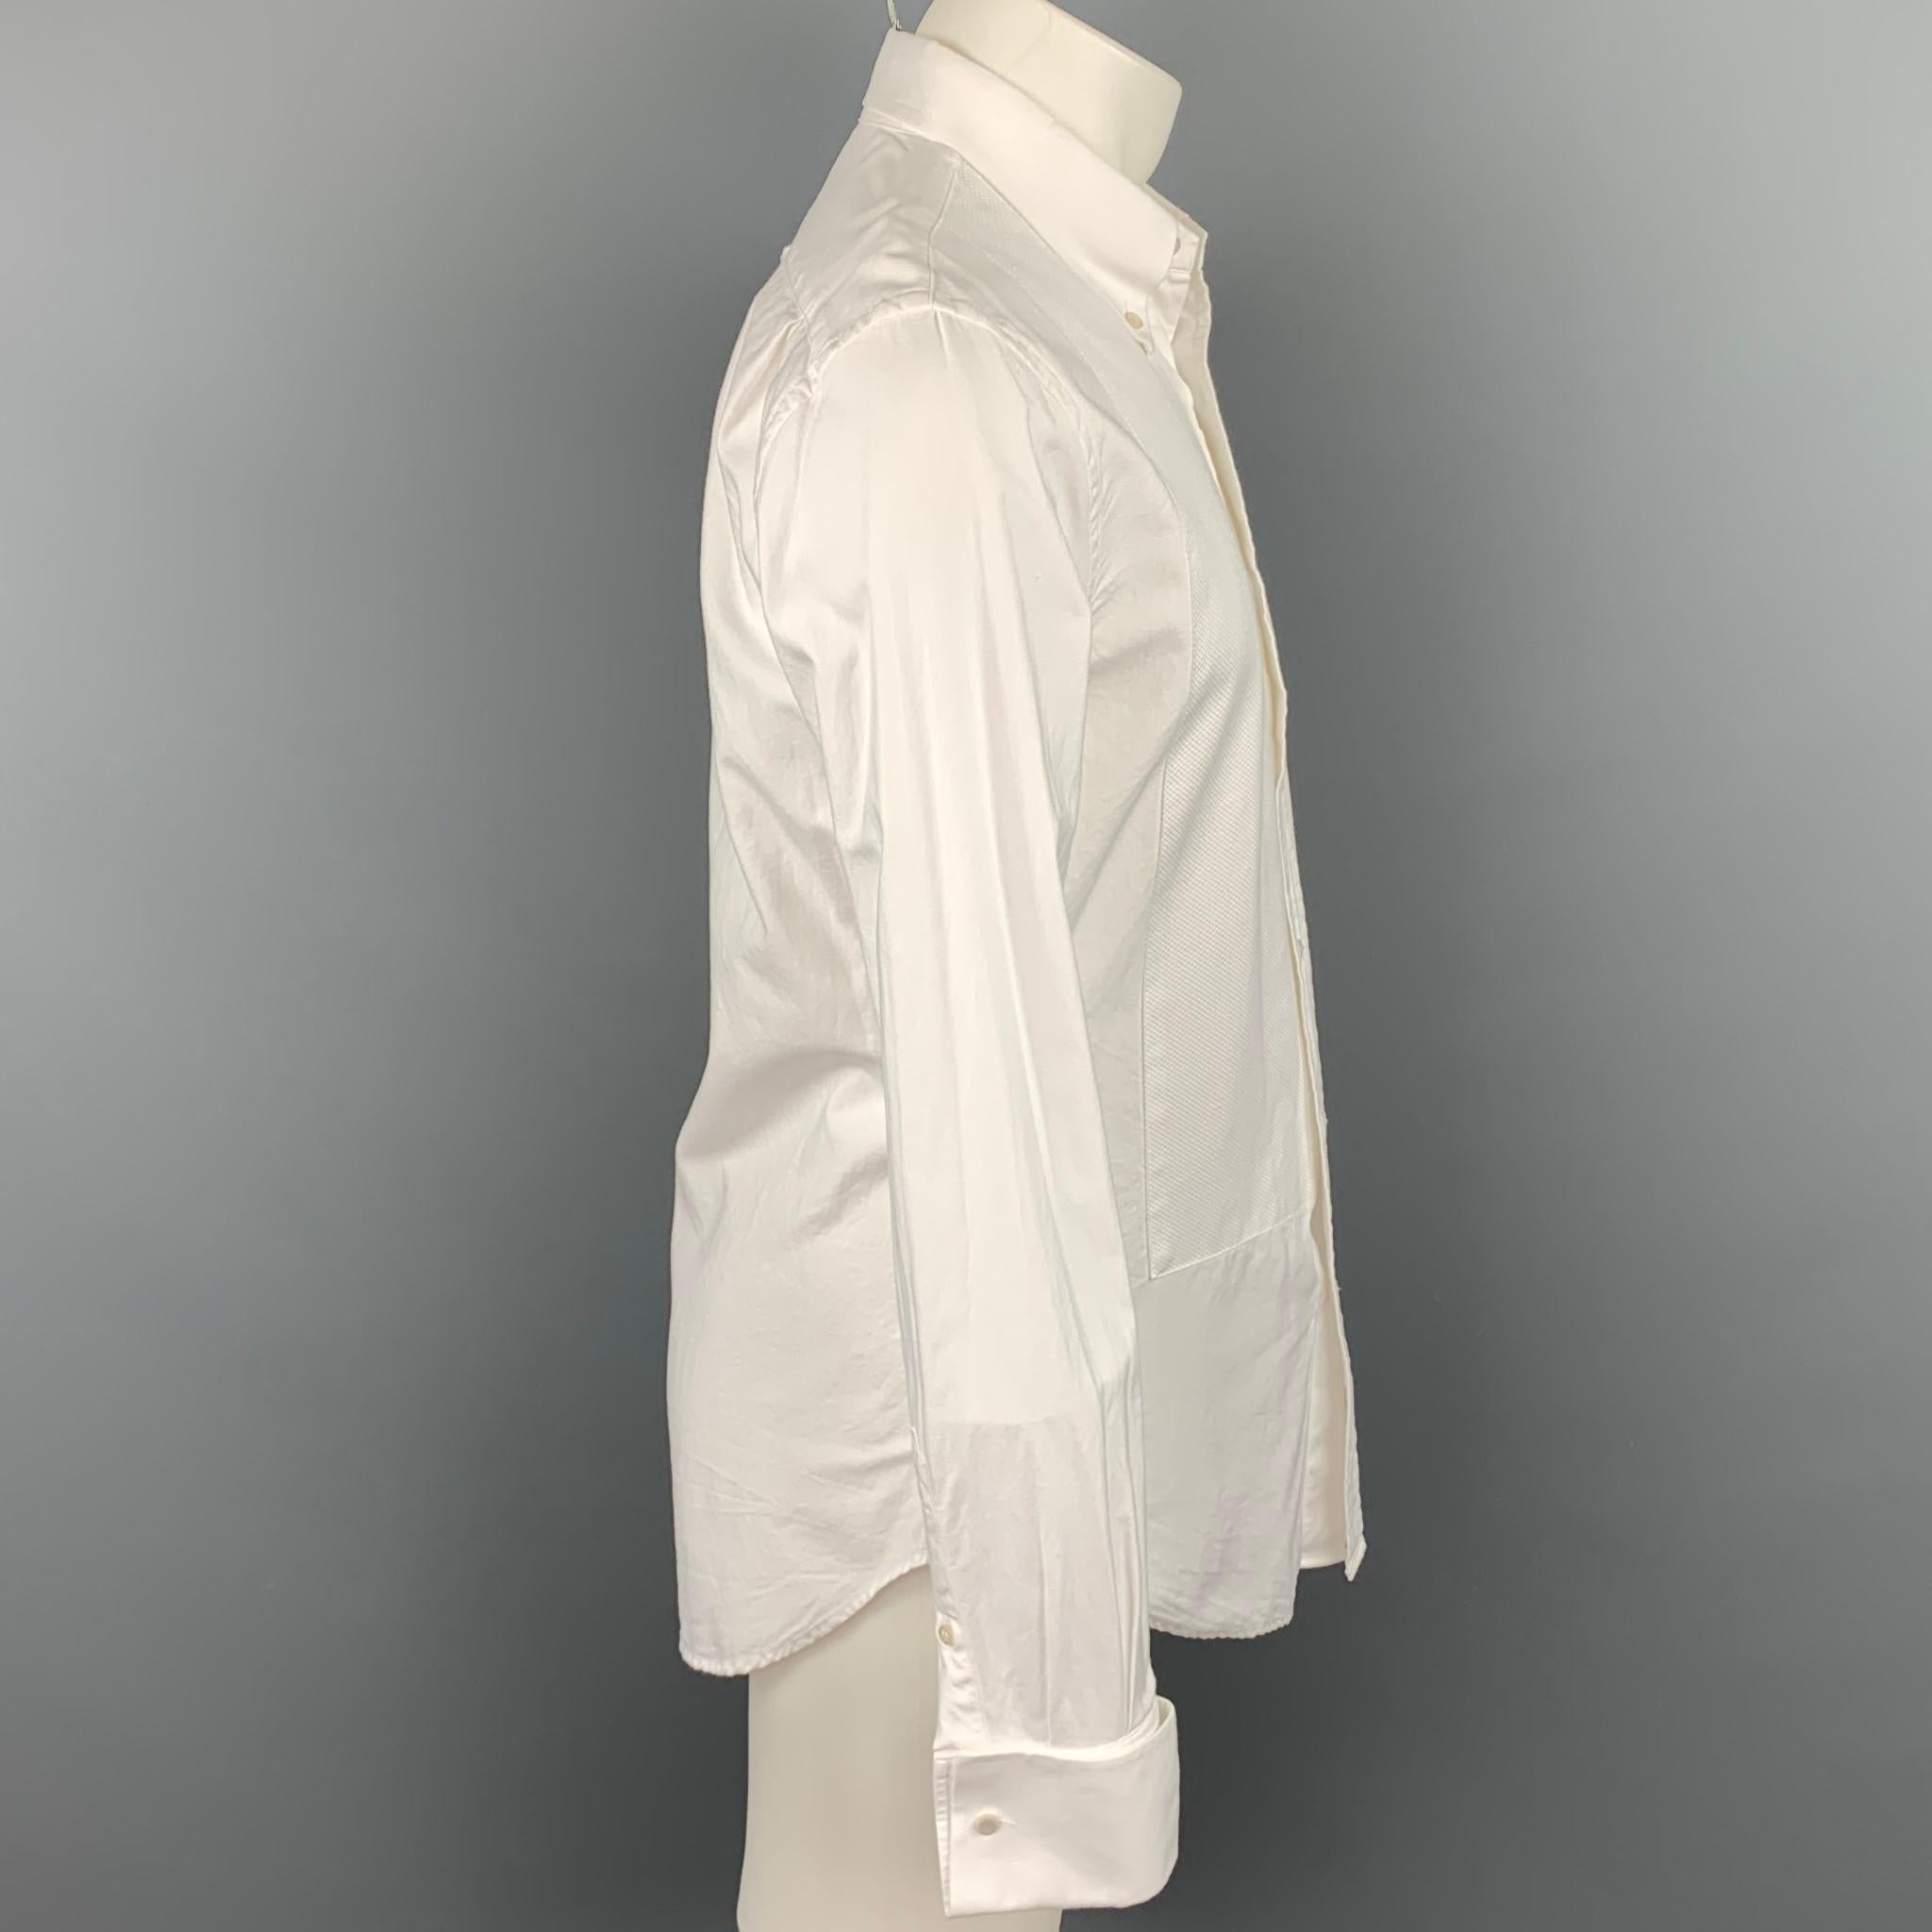 R.E.D. by VALENTINO long sleeve shirt comes in a white textured cotton featuring a front panel design, button down collar, french cuffs, and a buttoned closure. Made in Italy.

Good Pre-Owned Condition.
Marked: IT 50

Measurements:

Shoulder: 18